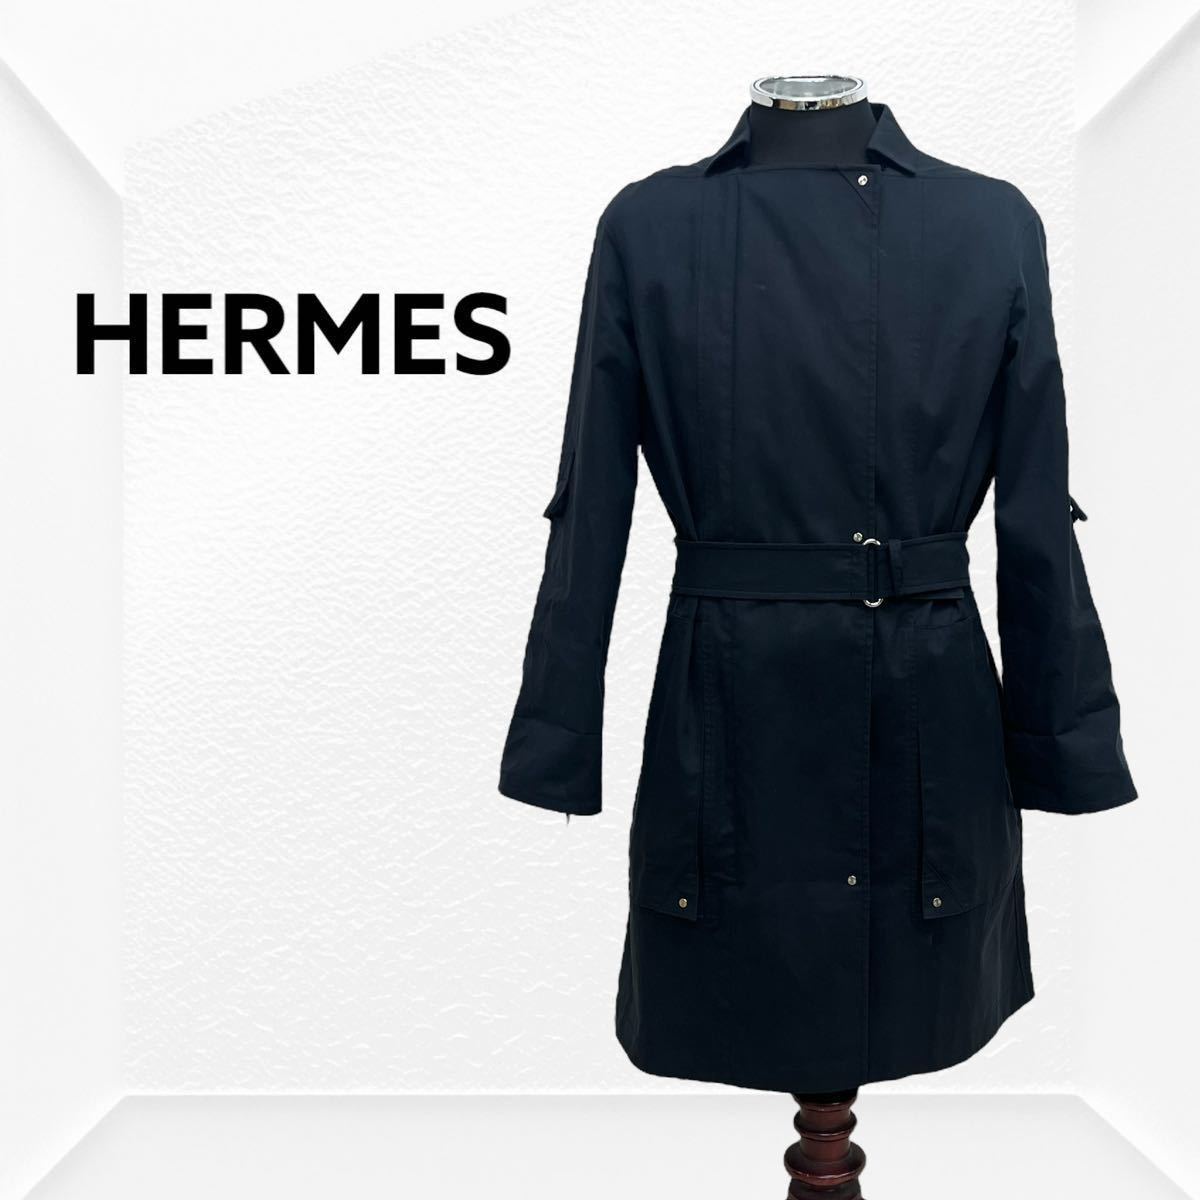  high class HERMES Hermes 2017 year of model cotton . Zip up trench coat lady's 